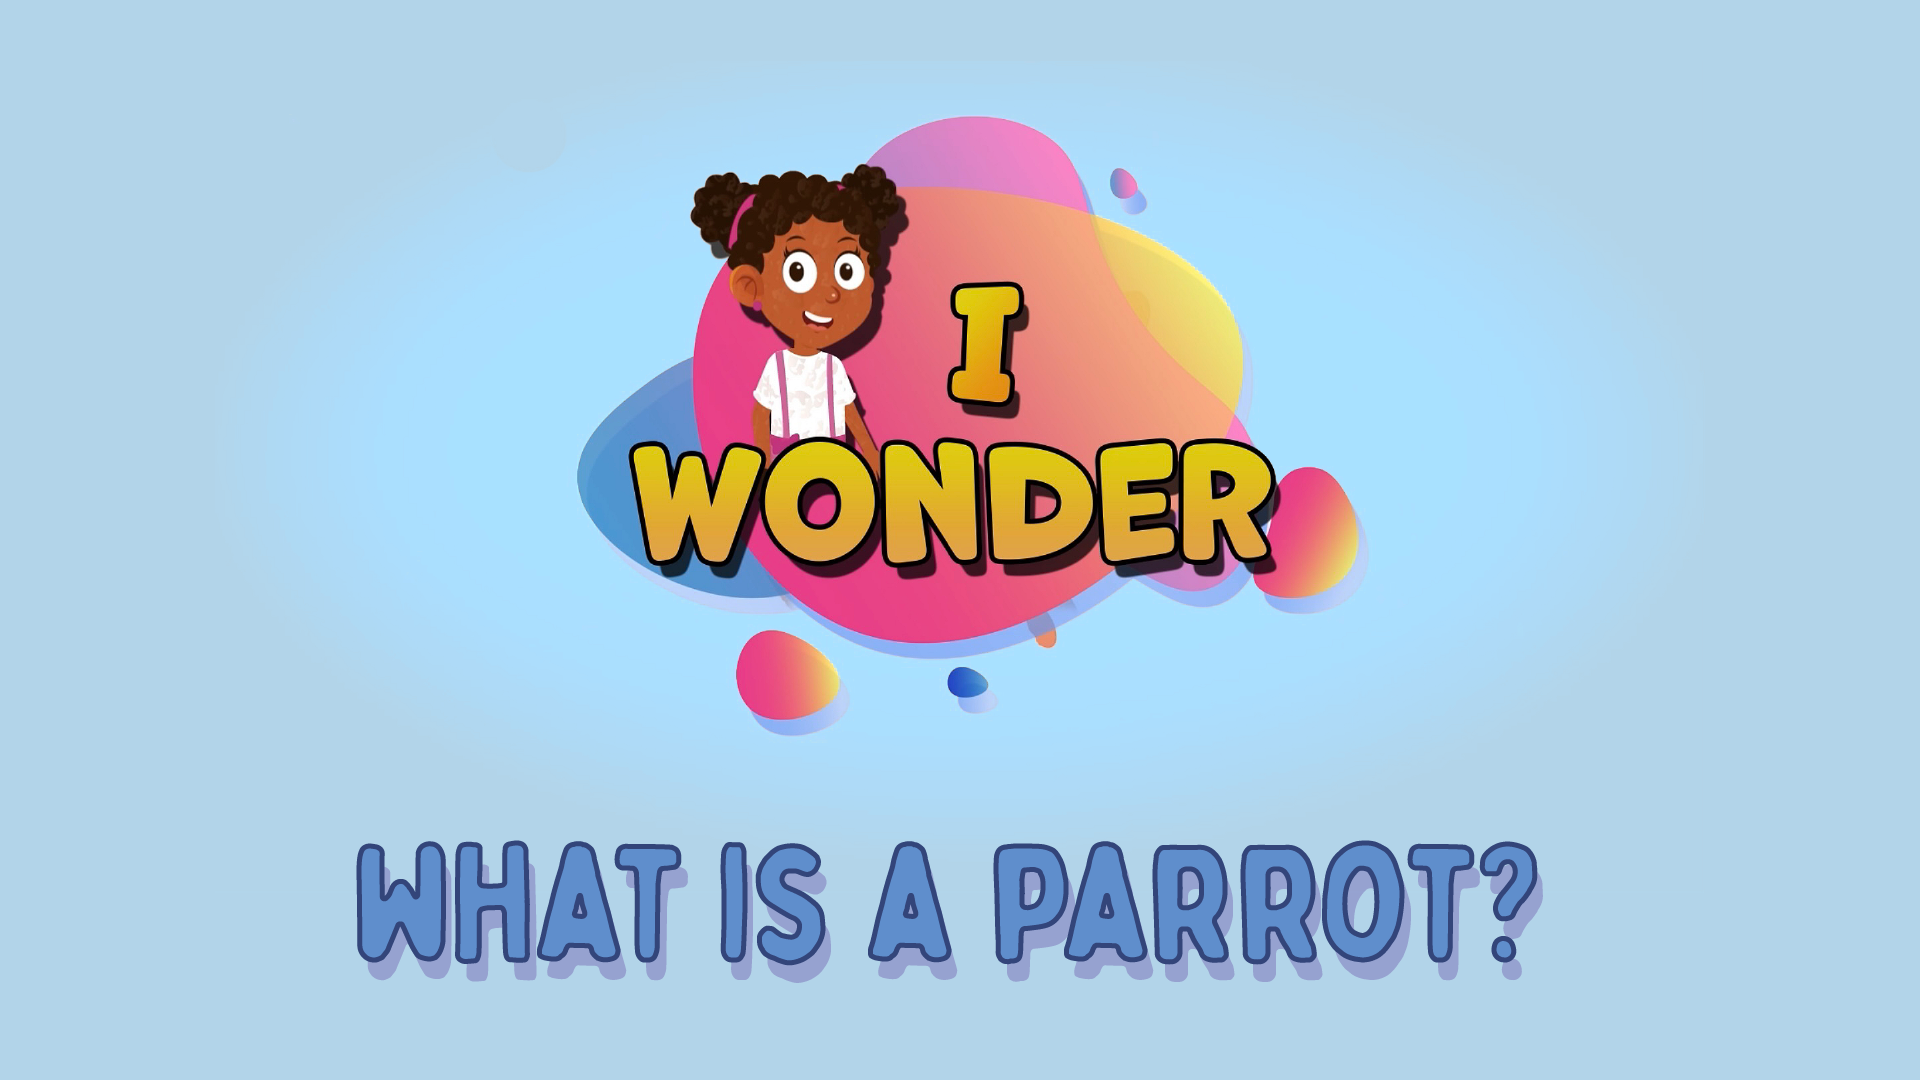 What Is A Parrot?